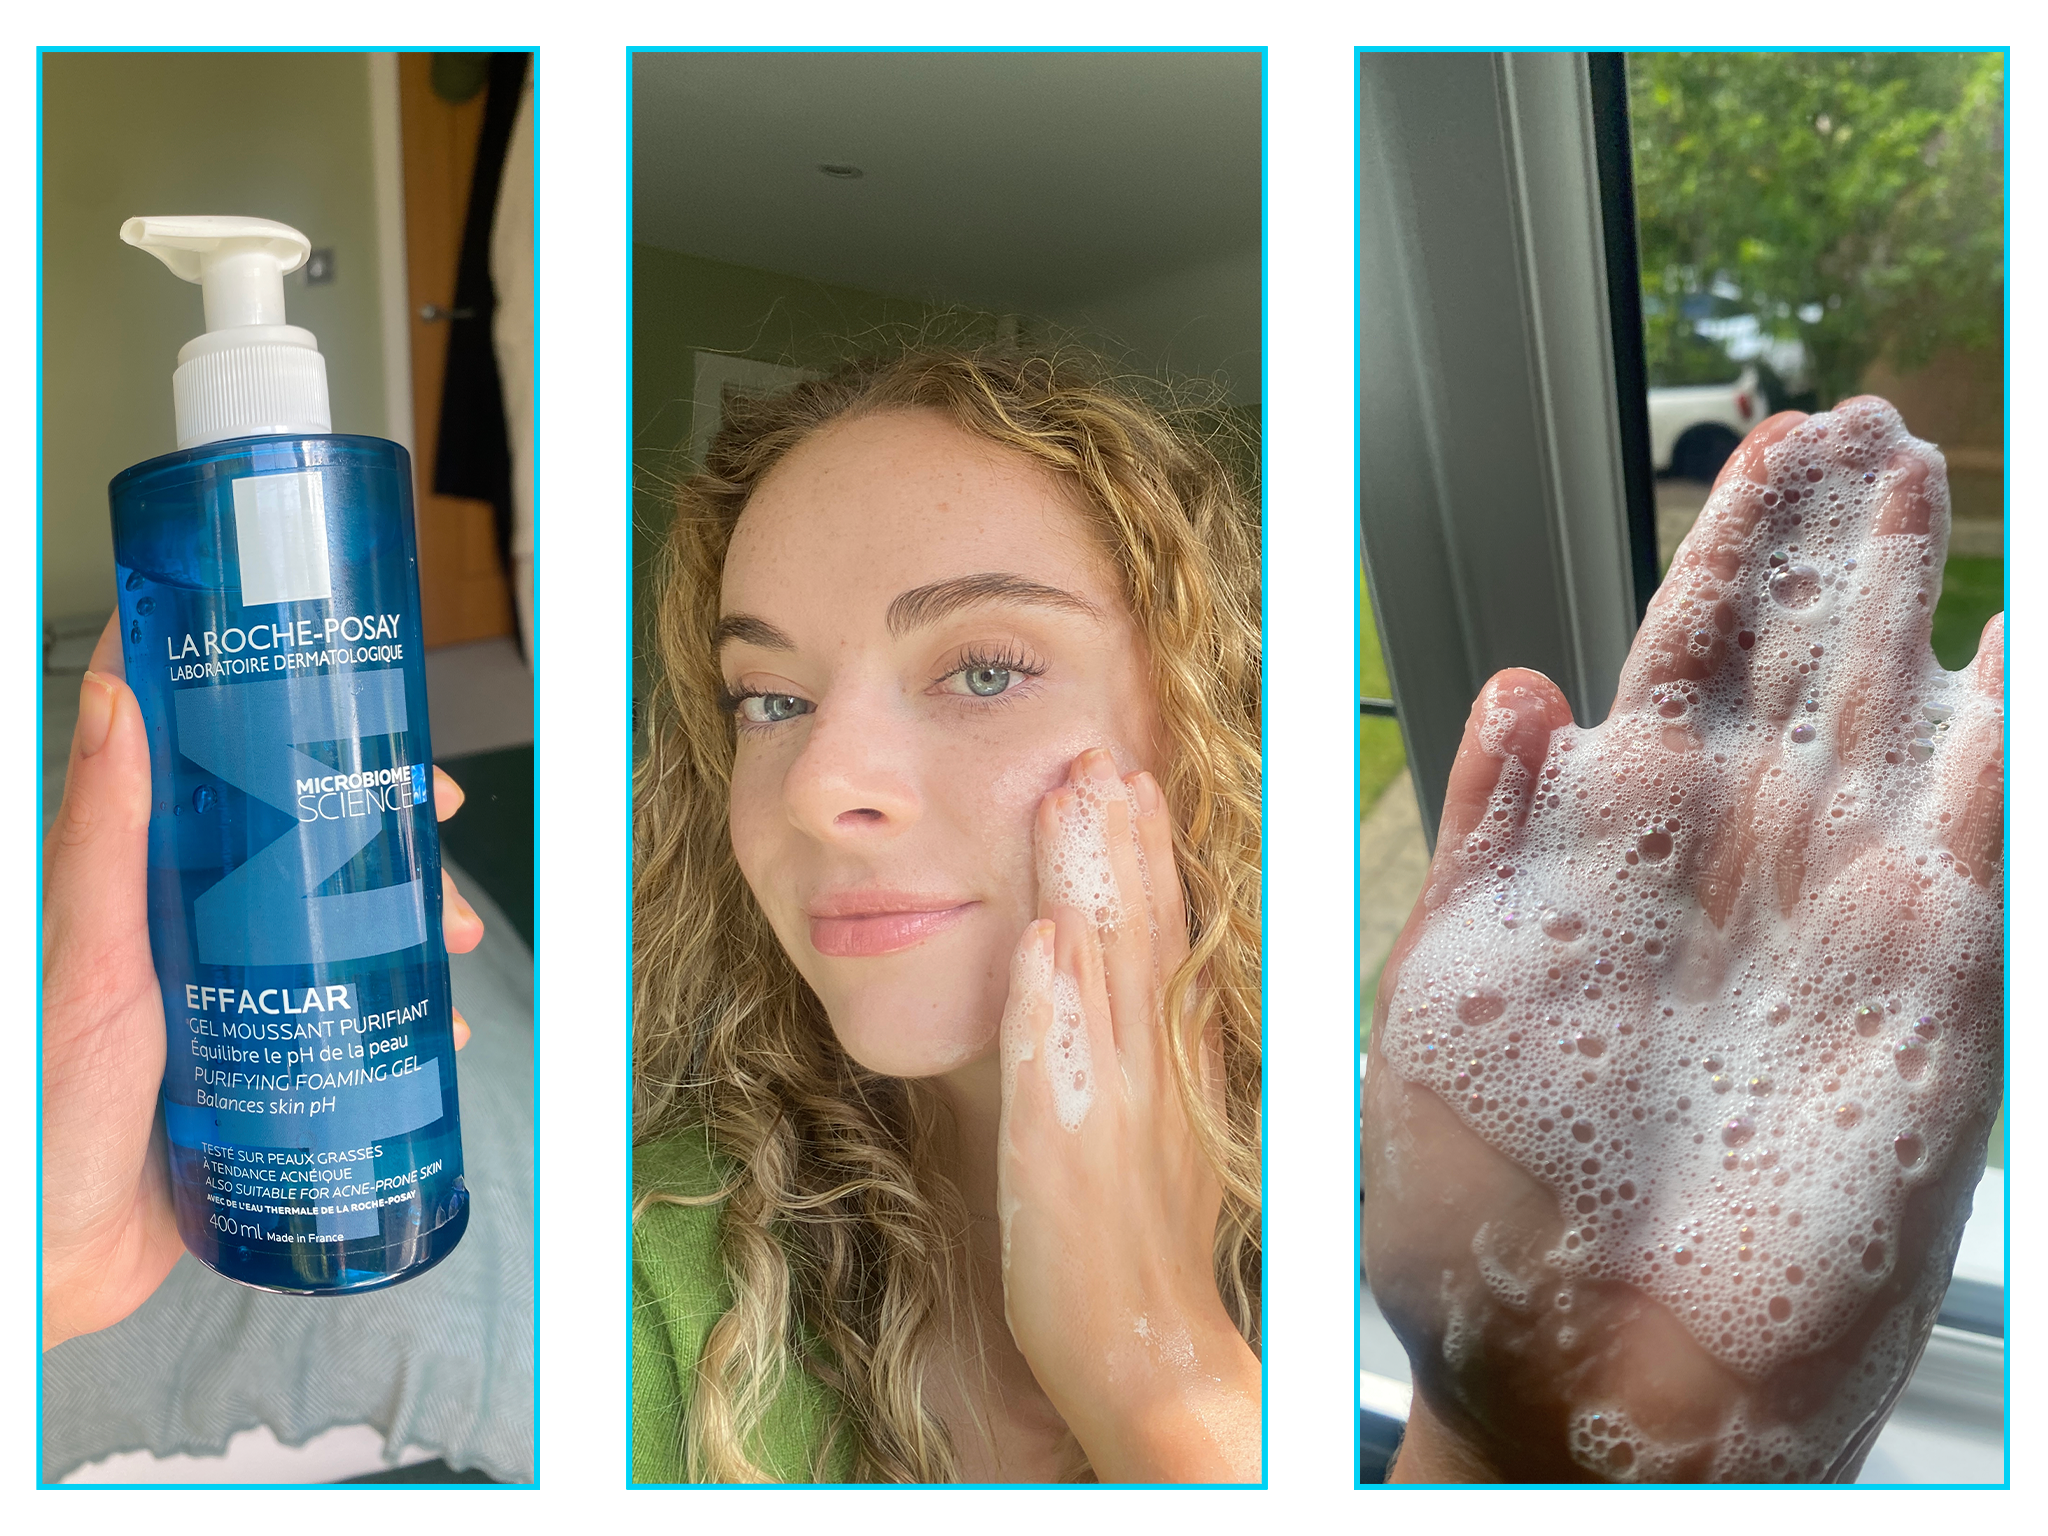 Our tester in action cleansing their skin with the favourite La Roche Posay face wash